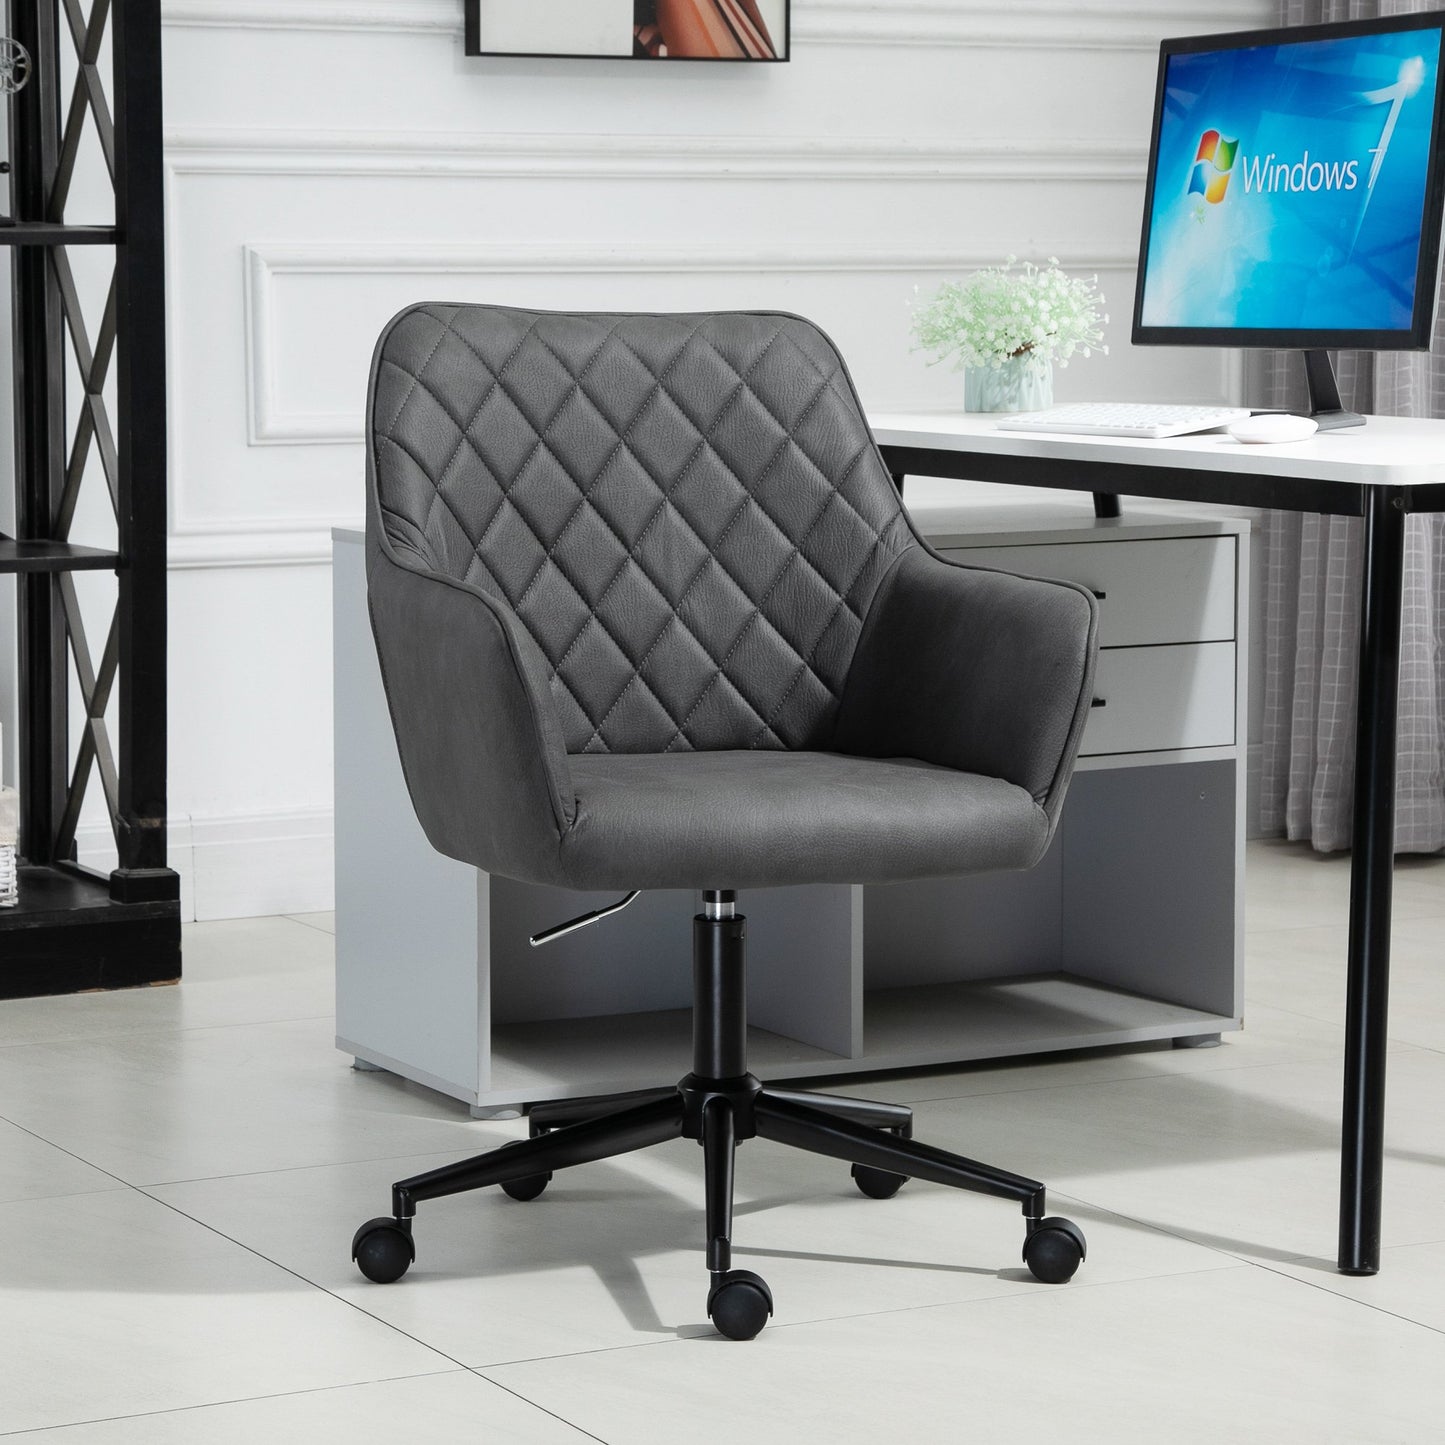 Vinsetto Swivel Argyle Office Chair Leather-Feel Fabric Home Study Leisure with Wheels